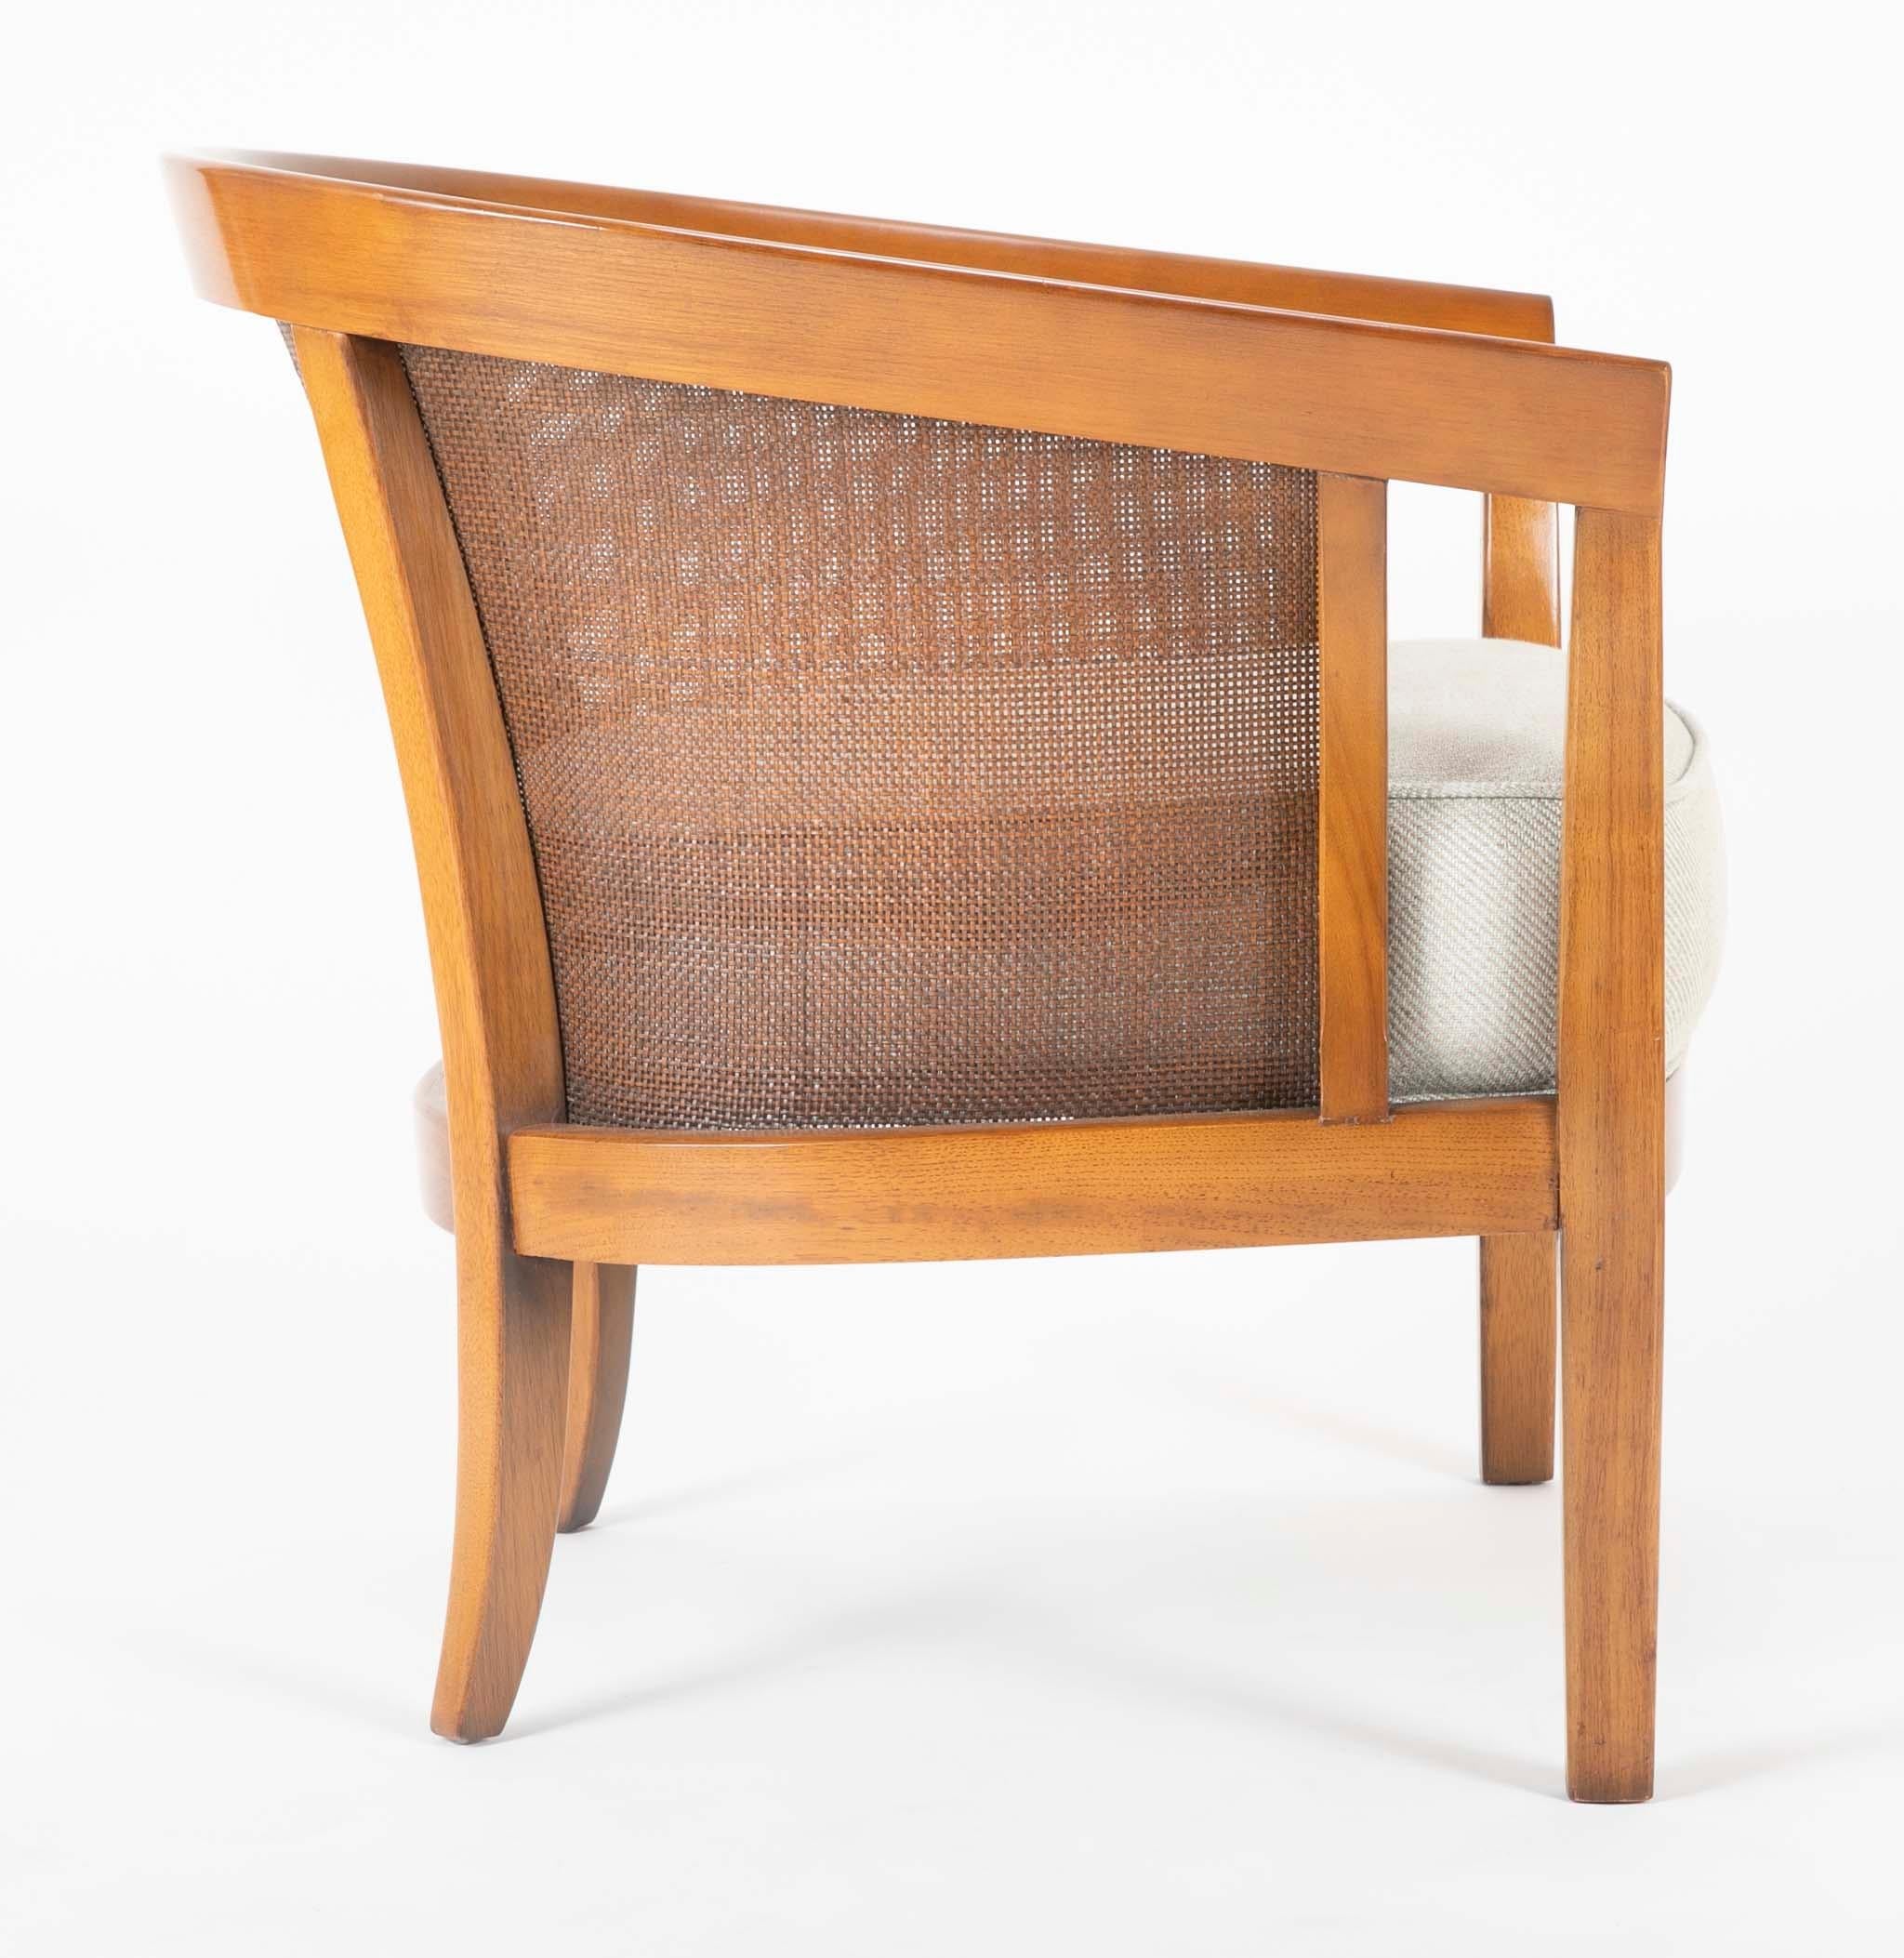 Mid-20th Century Pair of Caned Tub Back Armchairs Designed by Edward Wormley for Dunbar